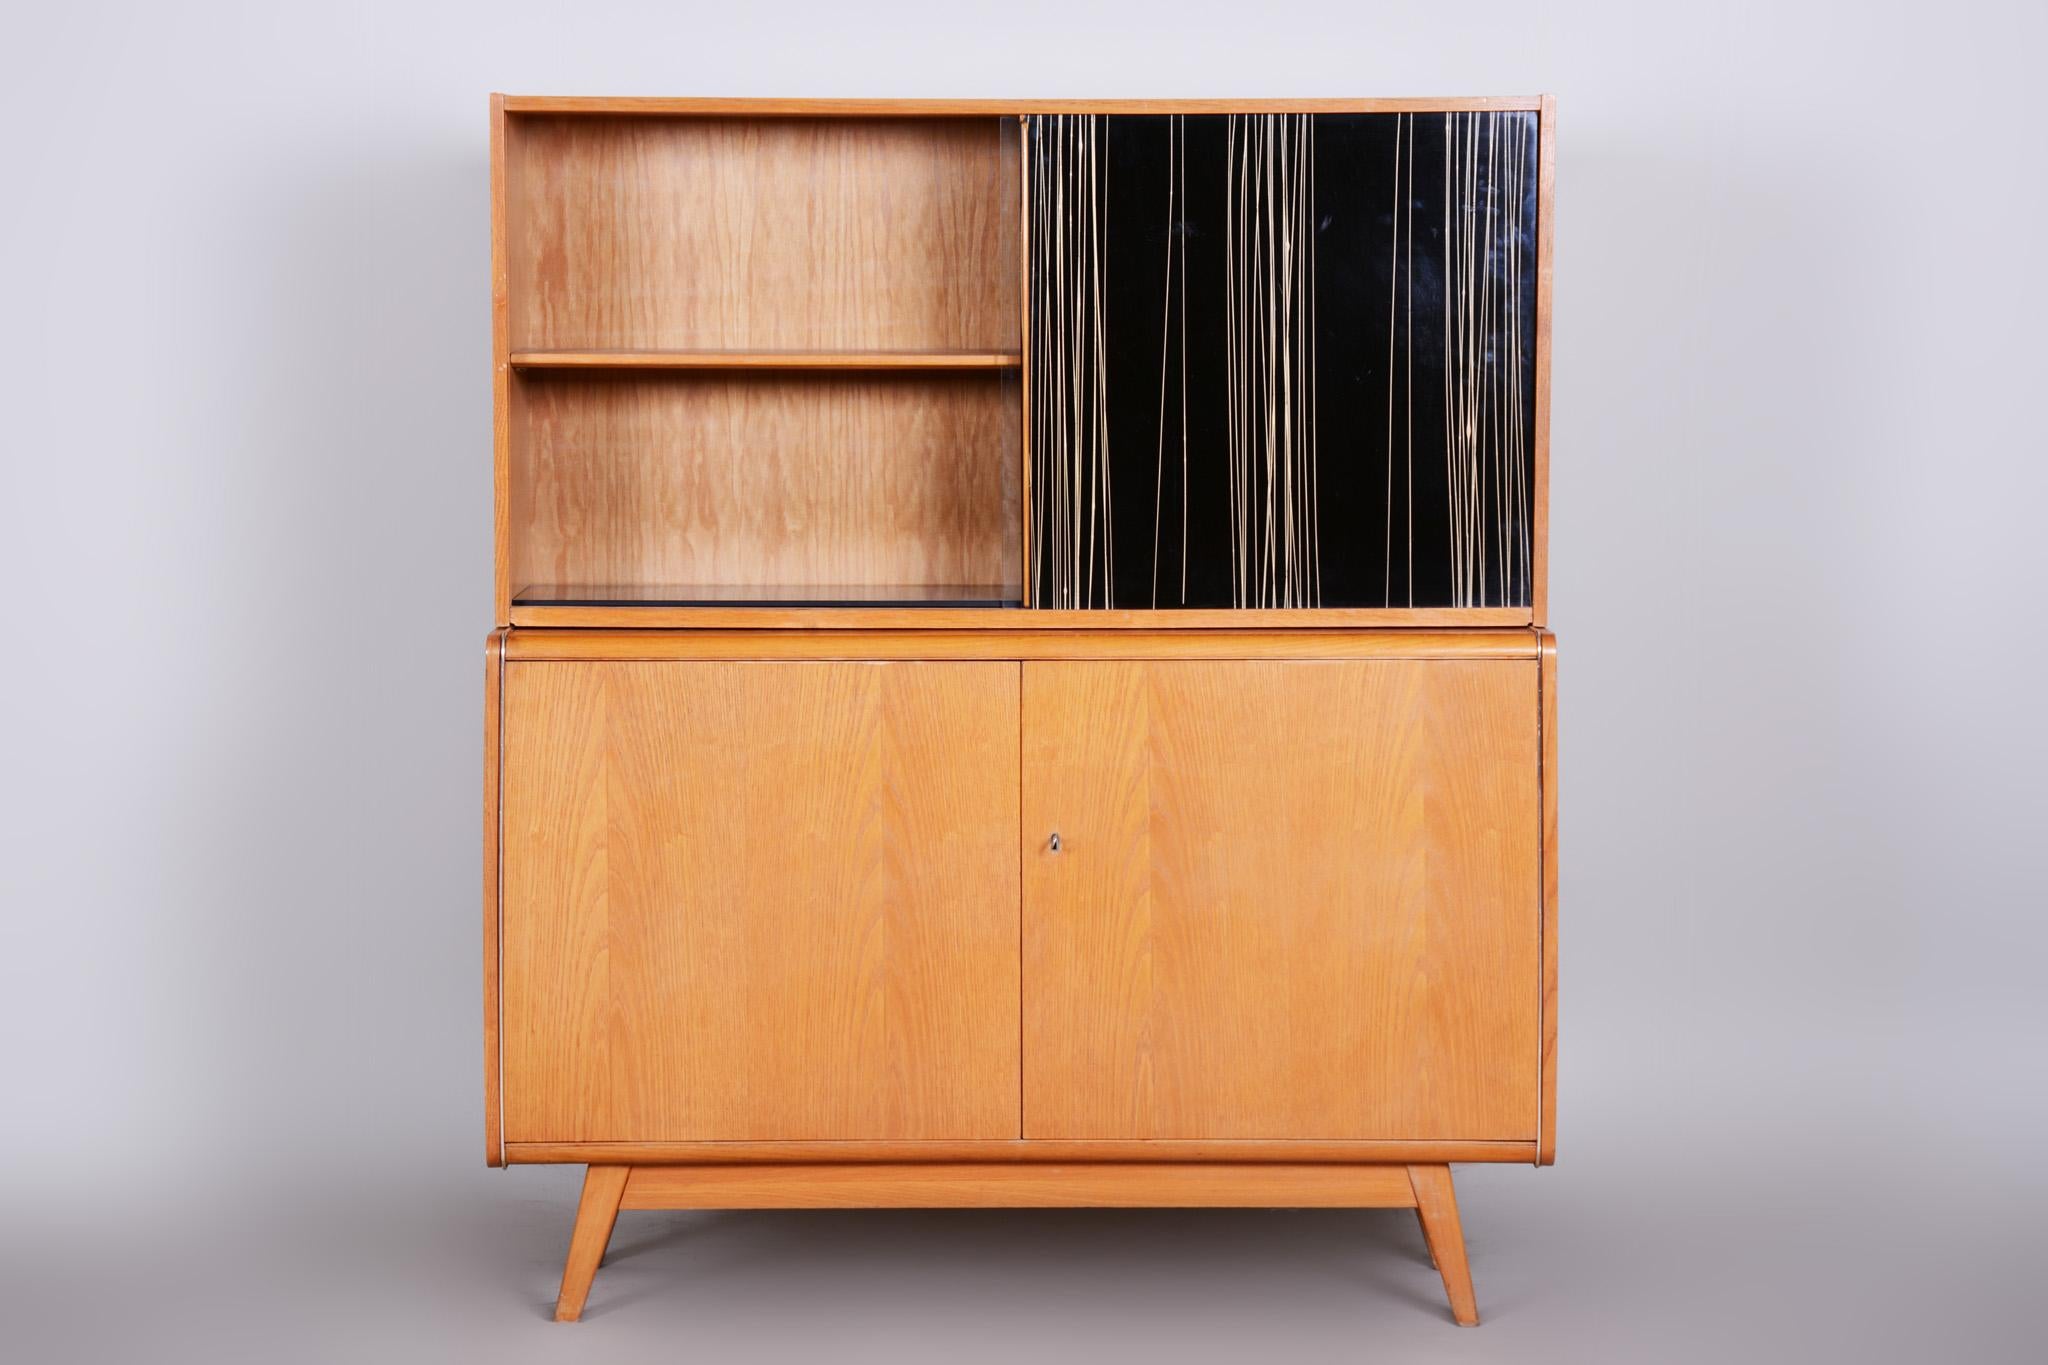 Czech Mid-Century Sideboard, 1950s, Well Preserved, Ash. Jitona Soběslav In Good Condition For Sale In Horomerice, CZ